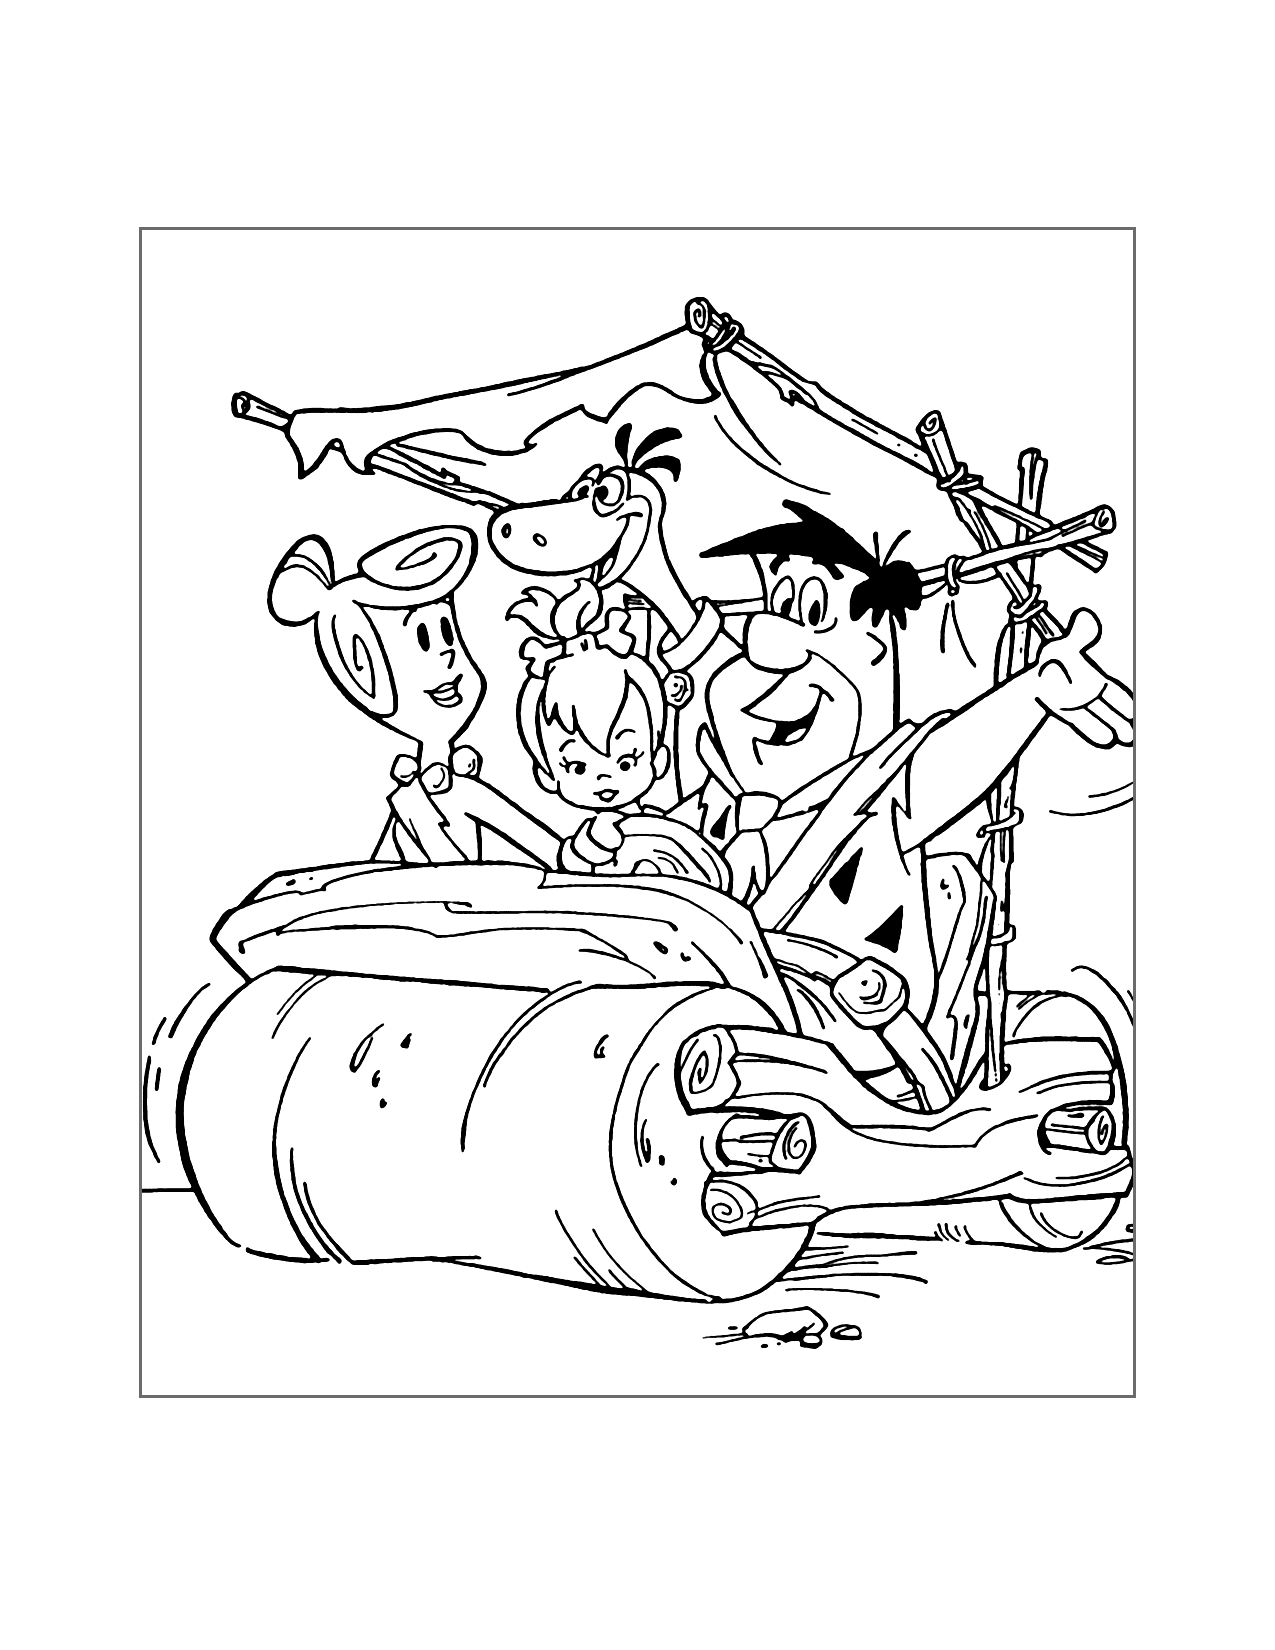 Flintstones Driving Their Car Coloring Page